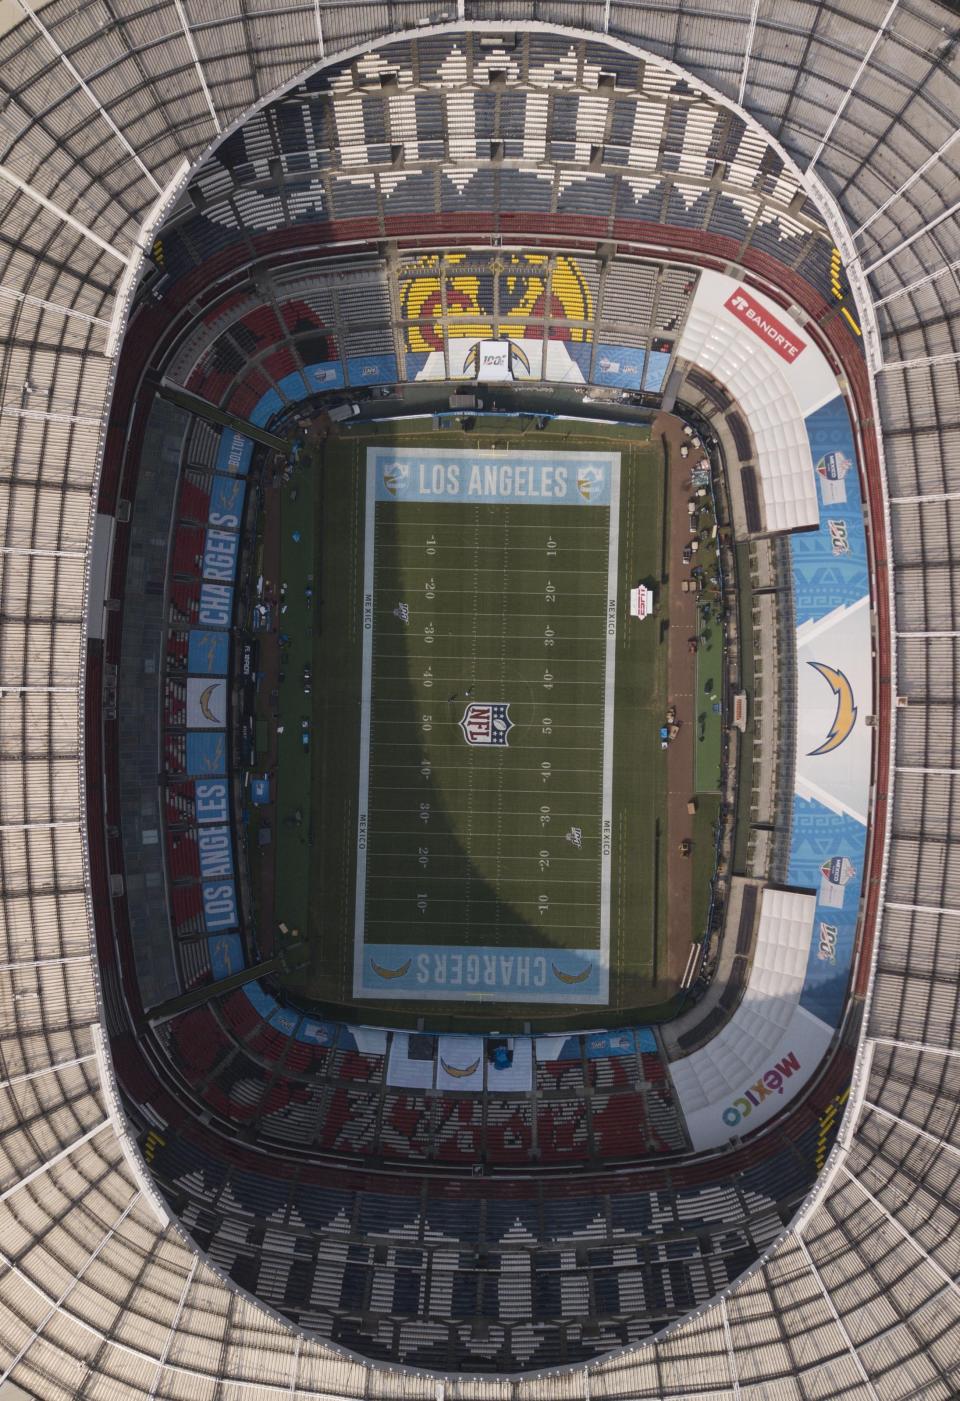 An aerial view of the Azteca Stadium in Mexico City, Saturday, Nov. 16, 2019, where the Kansas City Chiefs and Los Angeles Rams will face off for a regular-season Monday Night Football game. Heavy rain and heavy use last year left the grass unfit for the AFC matchup, forcing the Chiefs-Rams game to be relocated to Los Angeles. (AP Photo/Christian Palma)